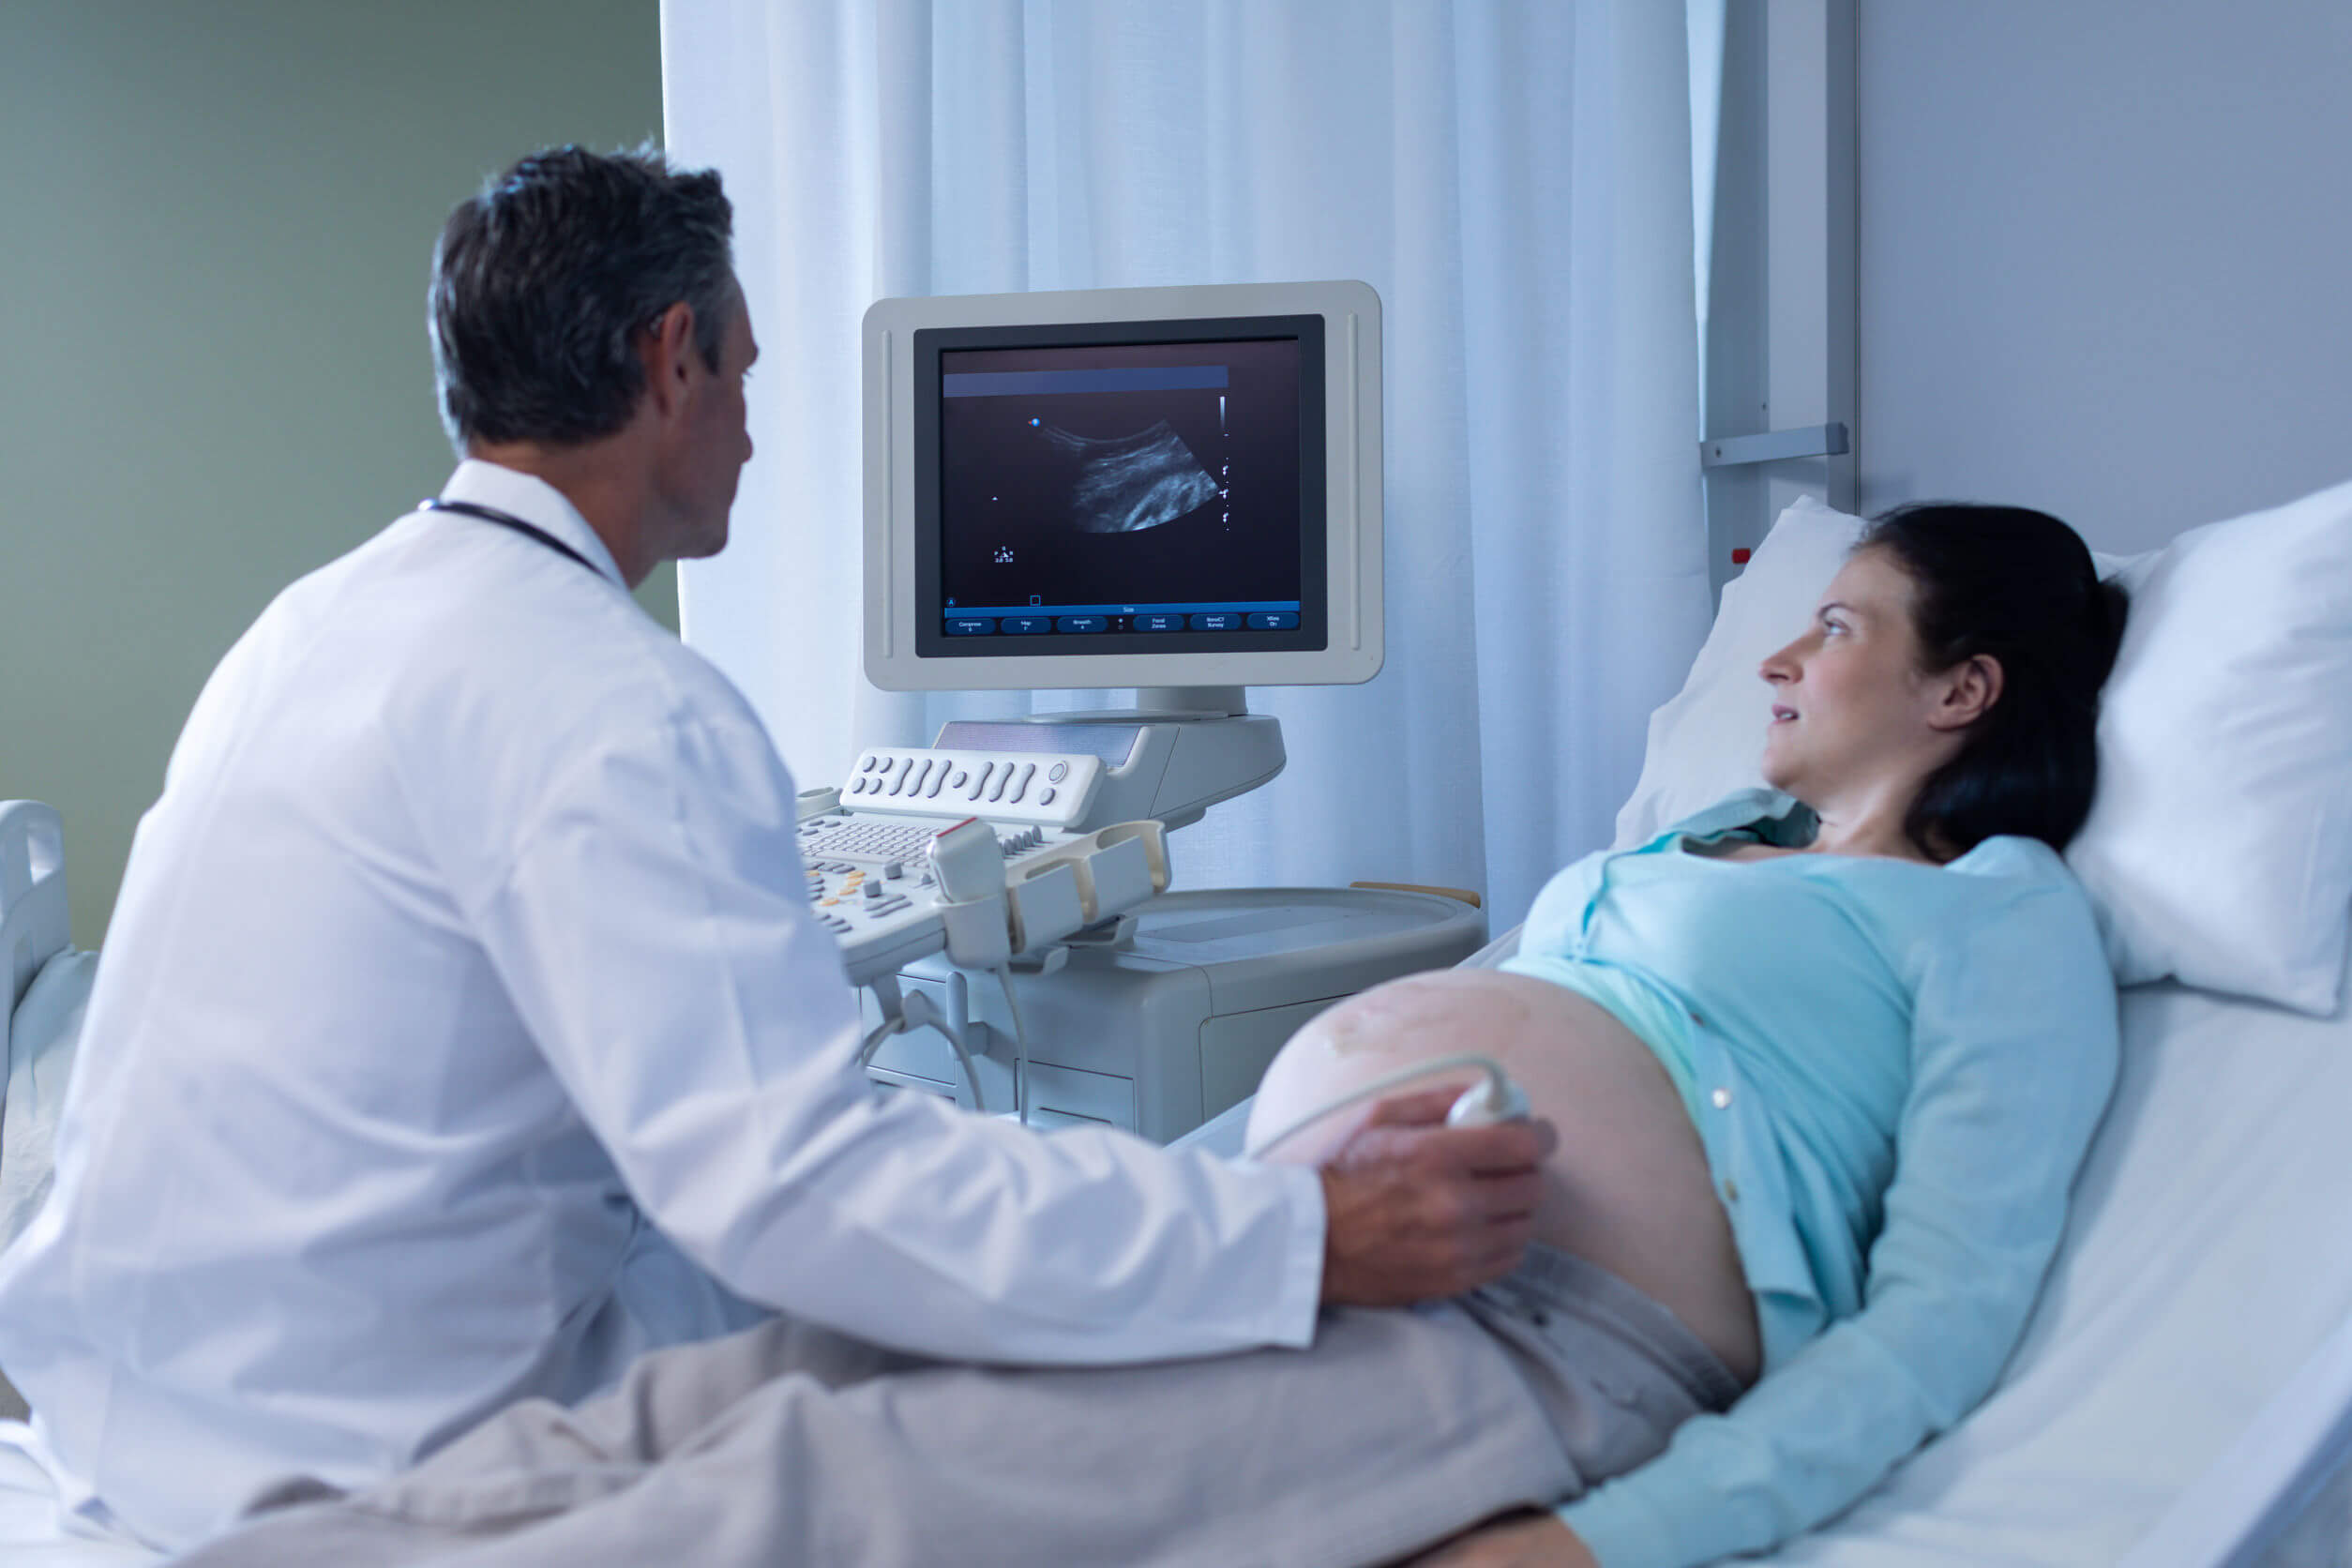 A doctor performing an ultrasound on a pregnant woman.